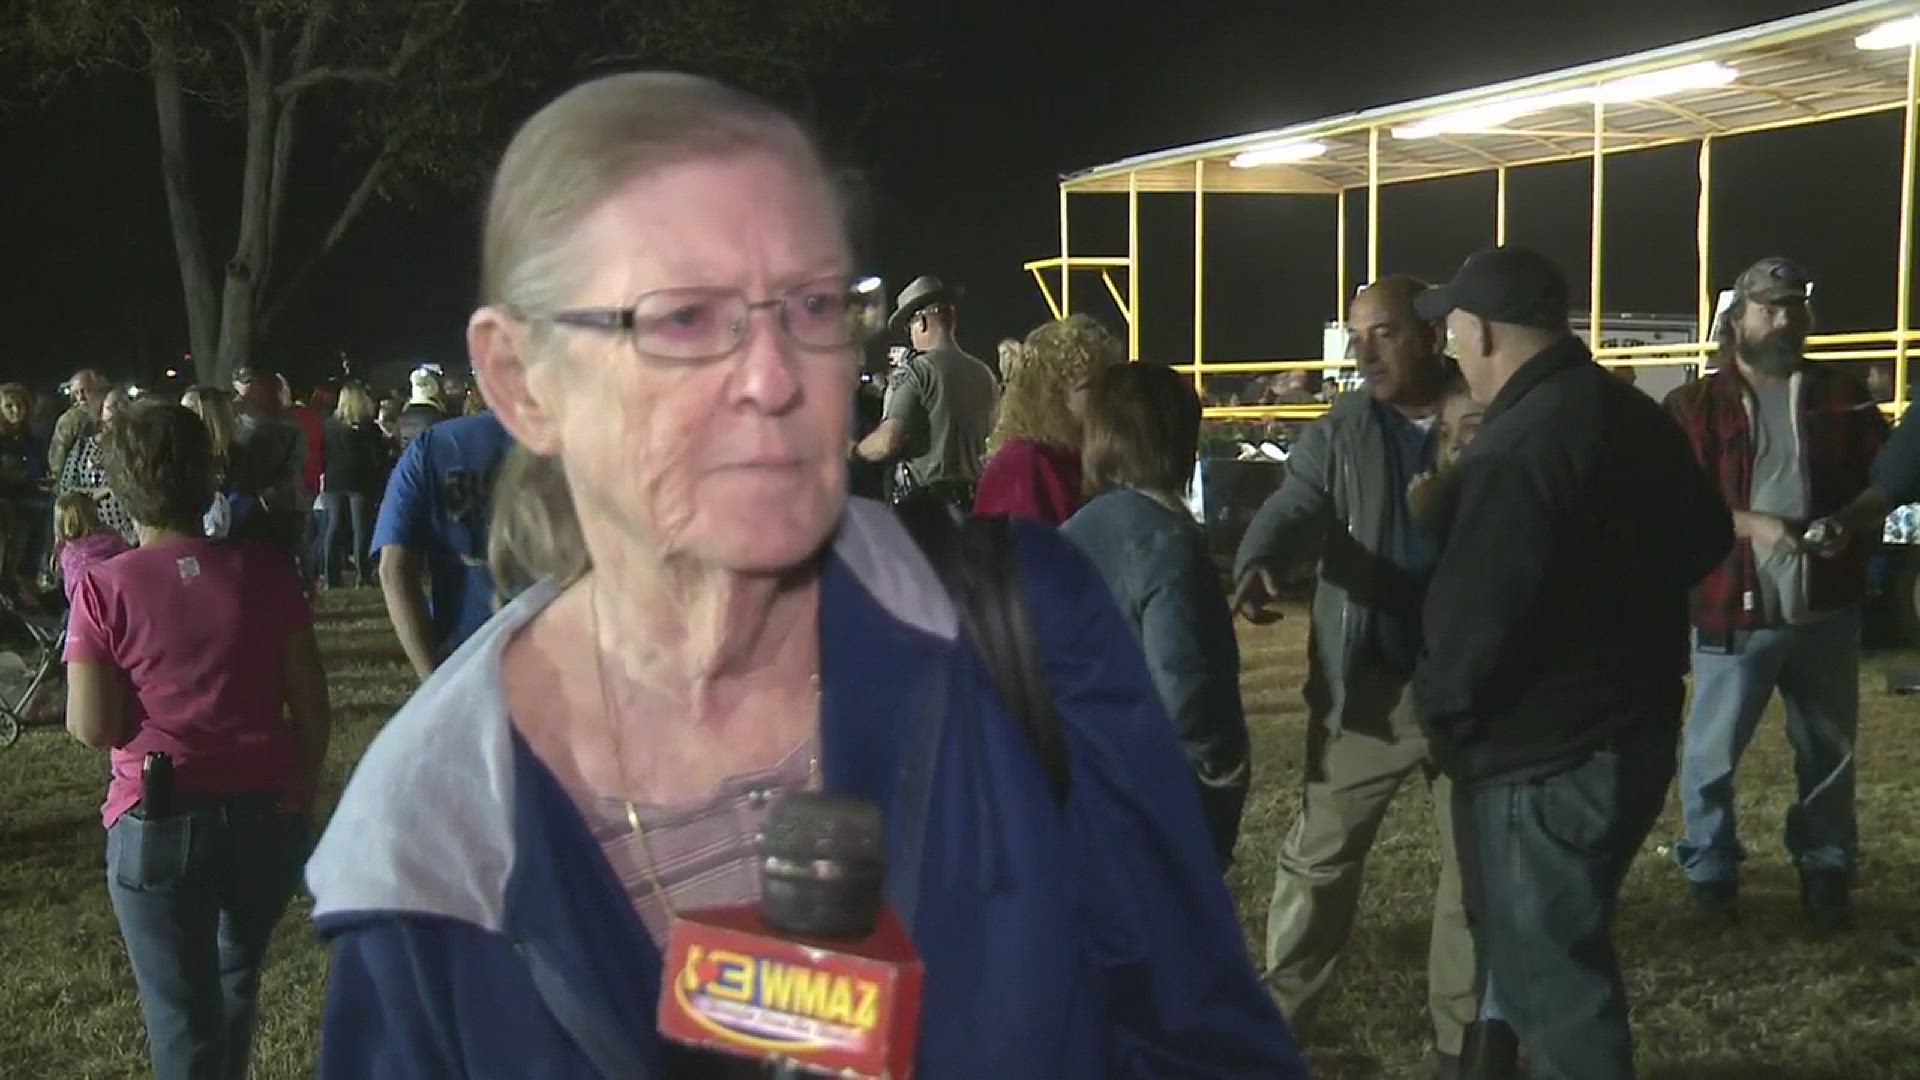 Patricia Sondron, the mother of fallen Peach Co. deputy Sgt. Patrick Sondron talks about her son after a candlelight vigil Tuesday. Sgt. Sondron and Deputy Daryl Smallwood were both shot and killed Sunday responding to a call in Byron.